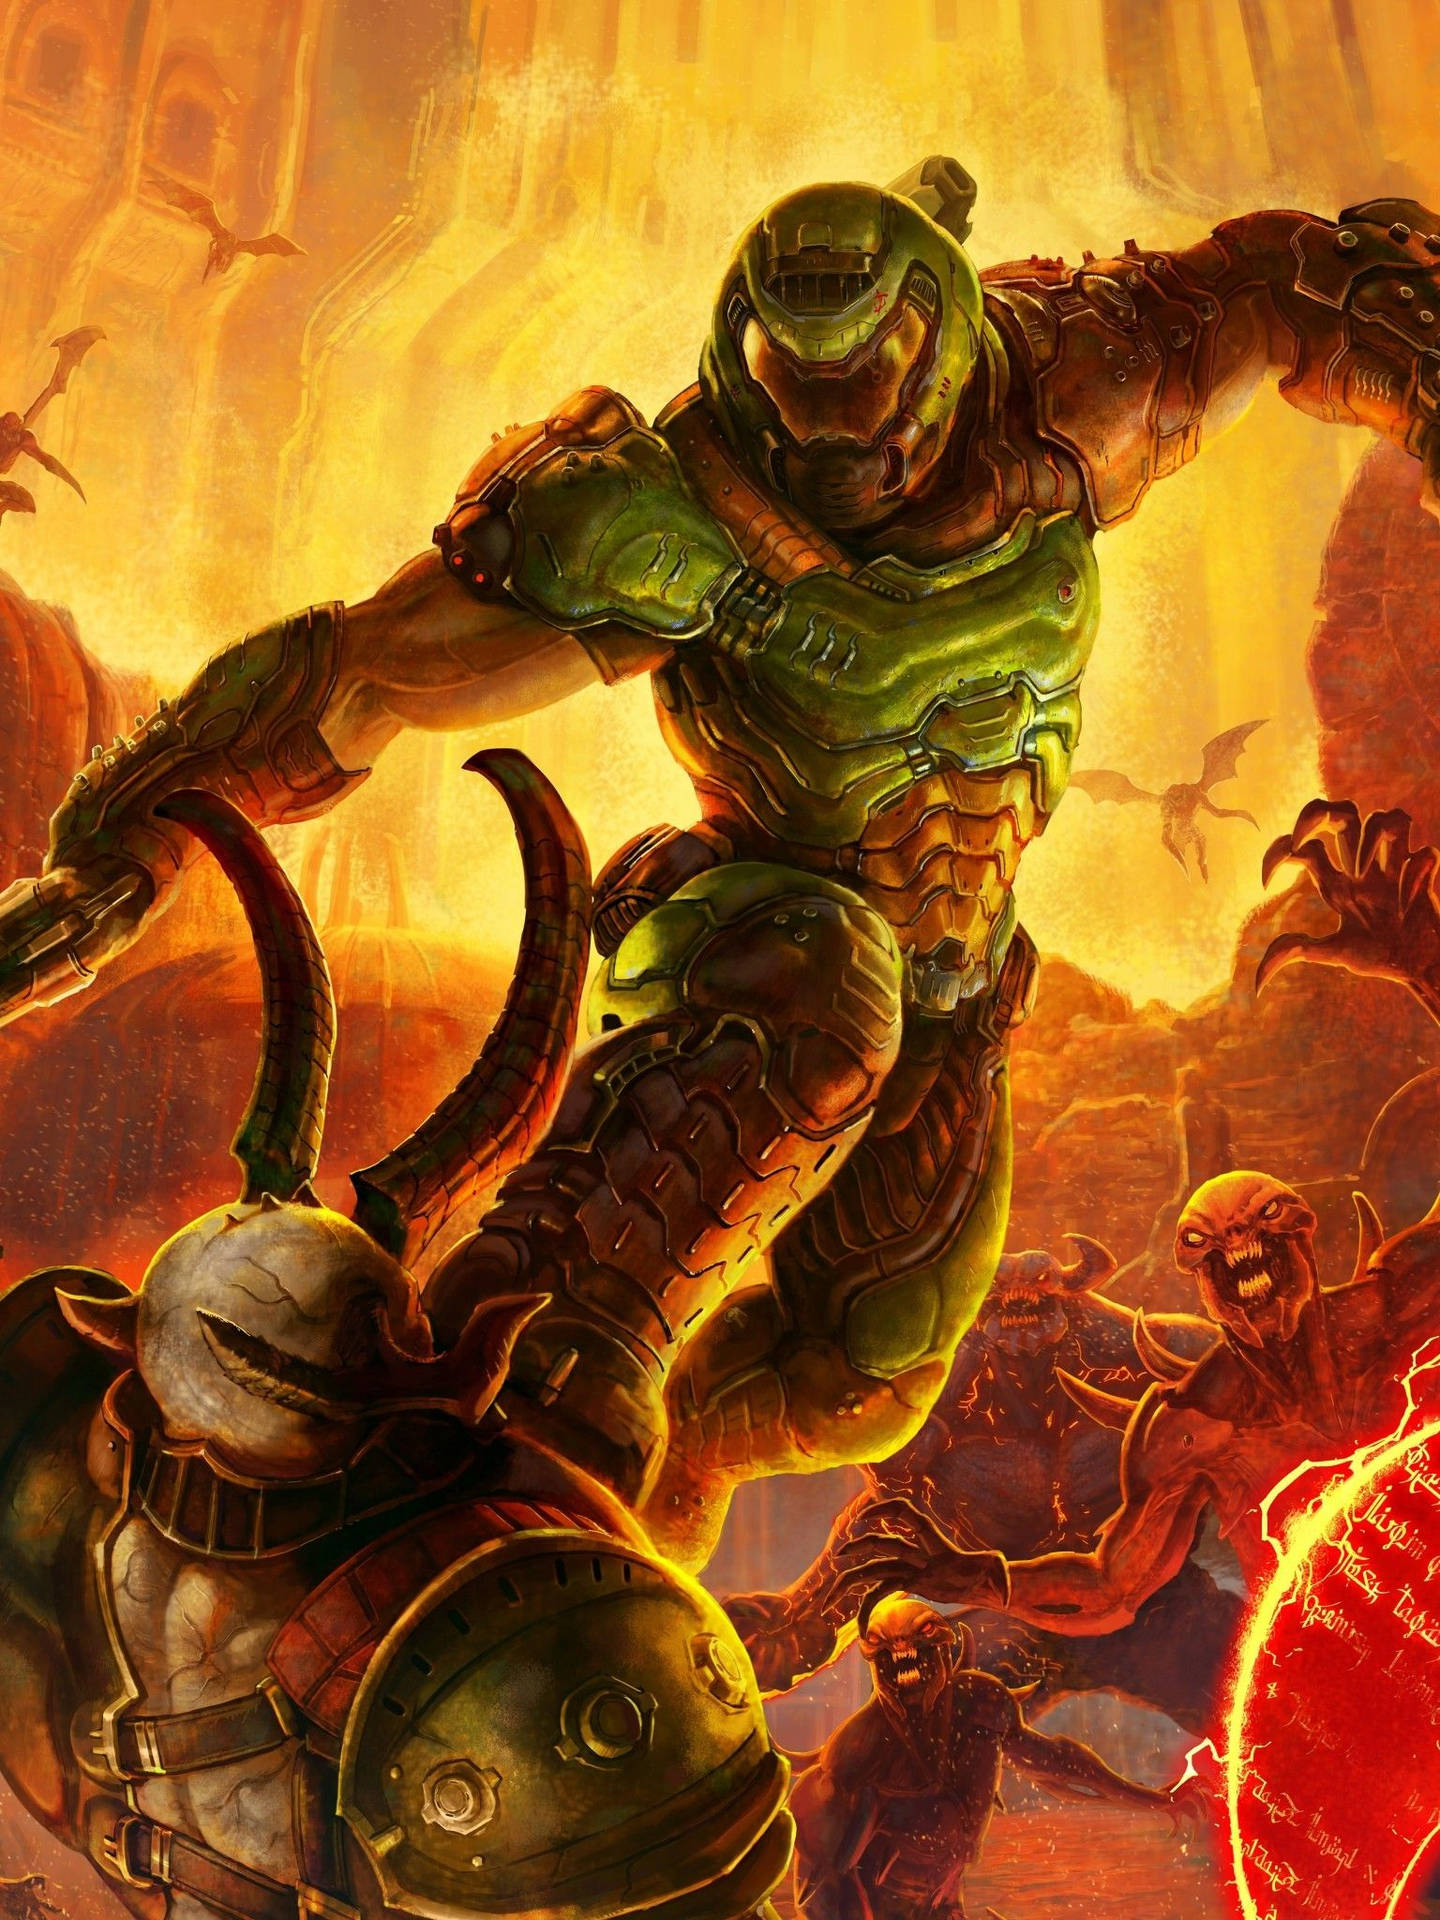 Join The Fight With The DOOM Slayer In DOOM Eternal Wallpaper